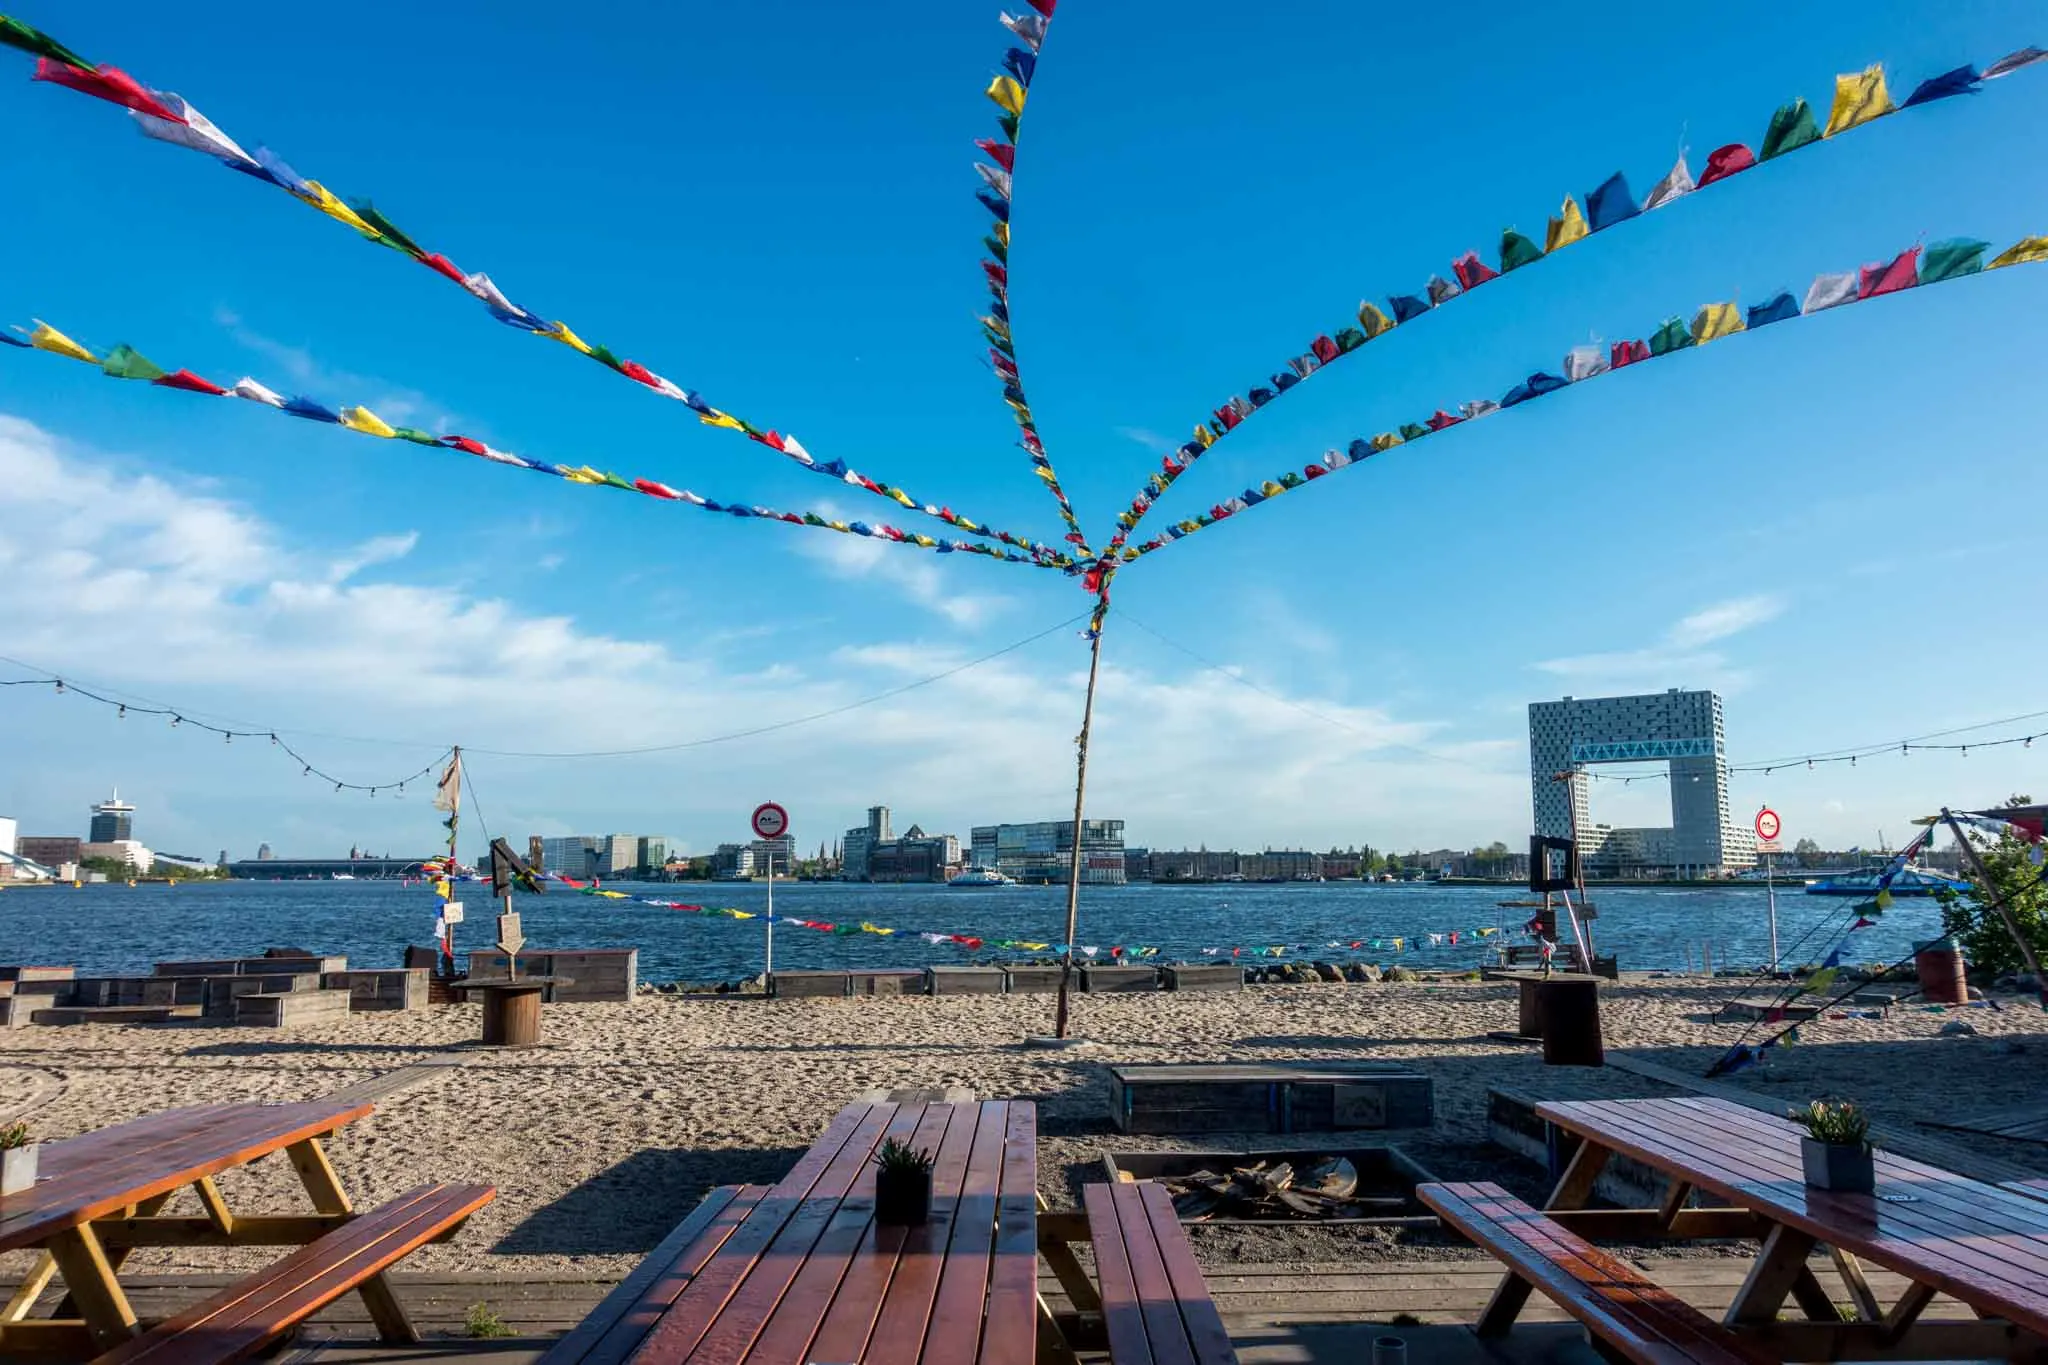 Picnic tables on a beach with flags flying overhead